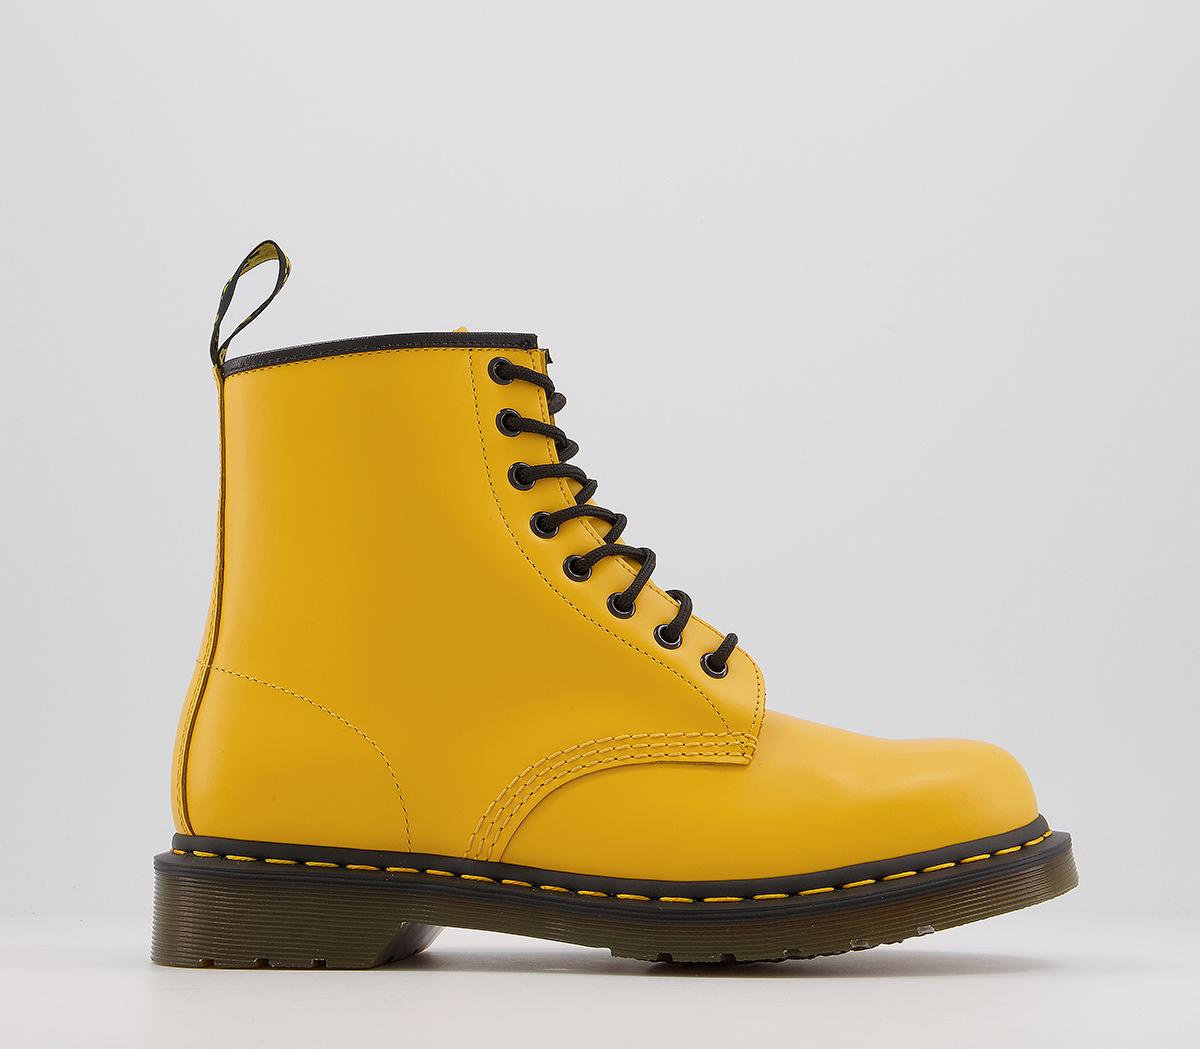 Dr. Martens 1460 8 Eye Boots Dms Yellow - Women's Ankle Boots